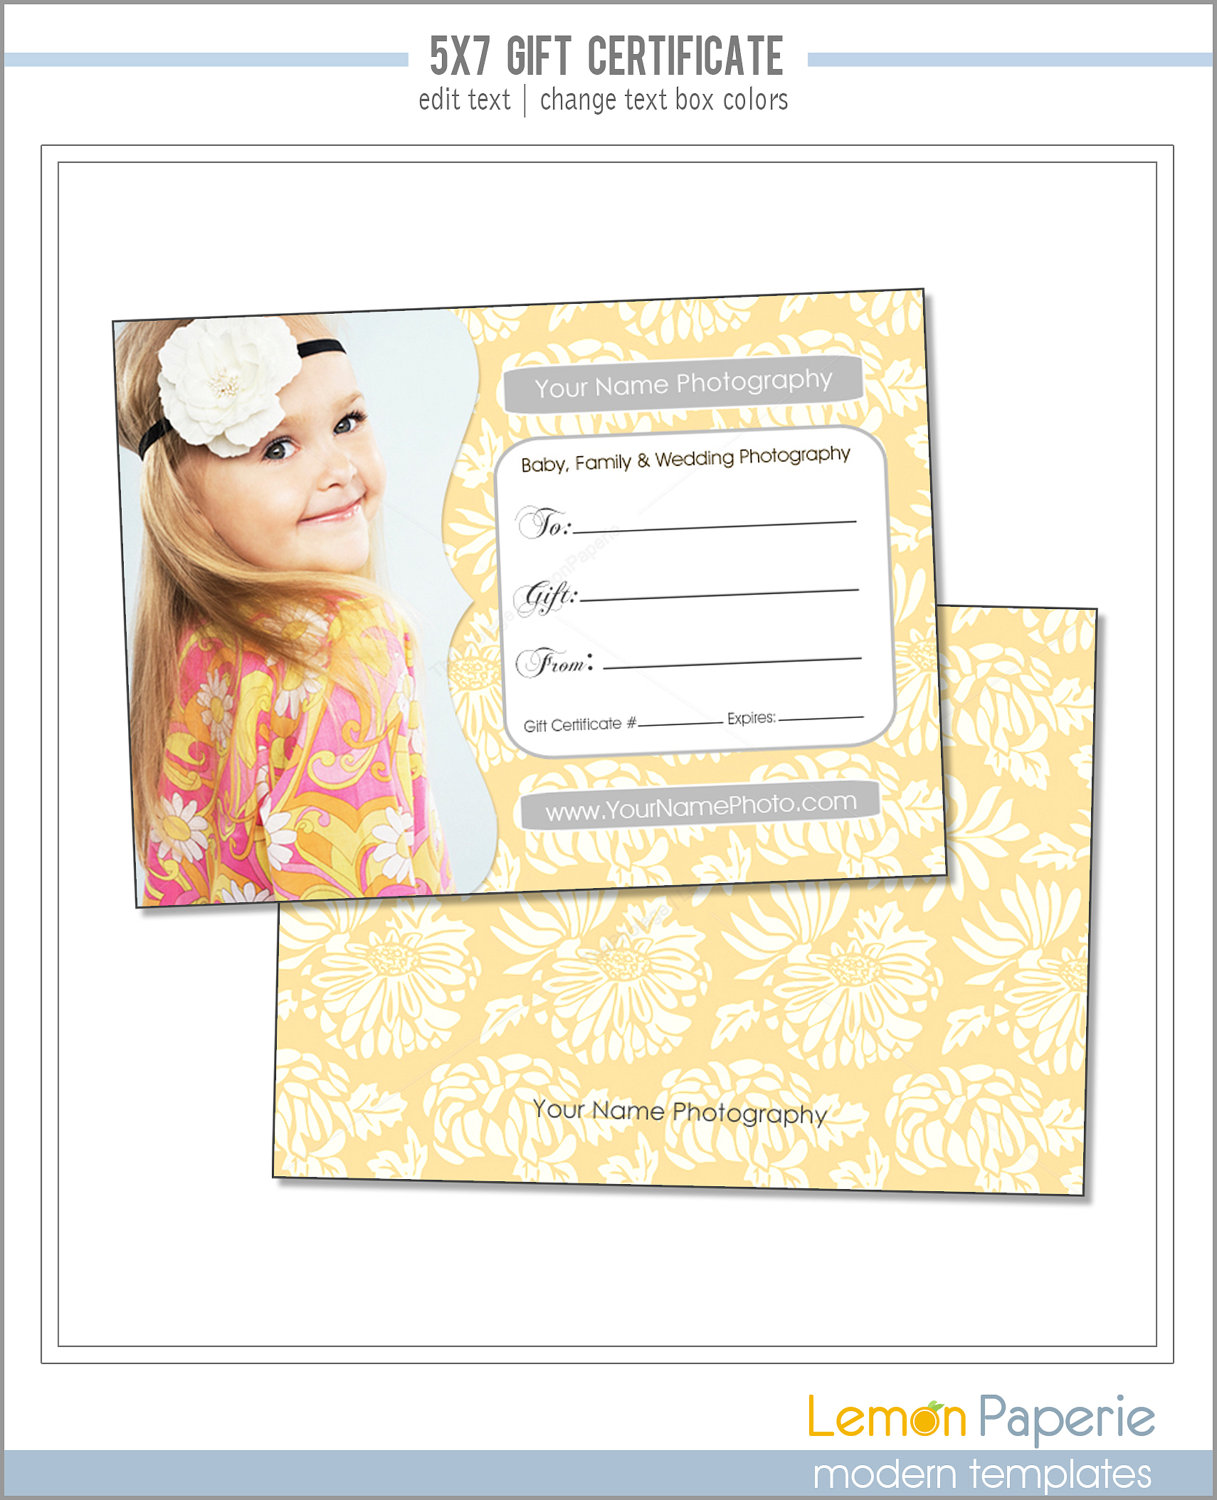 Free Gift Certificate Templates